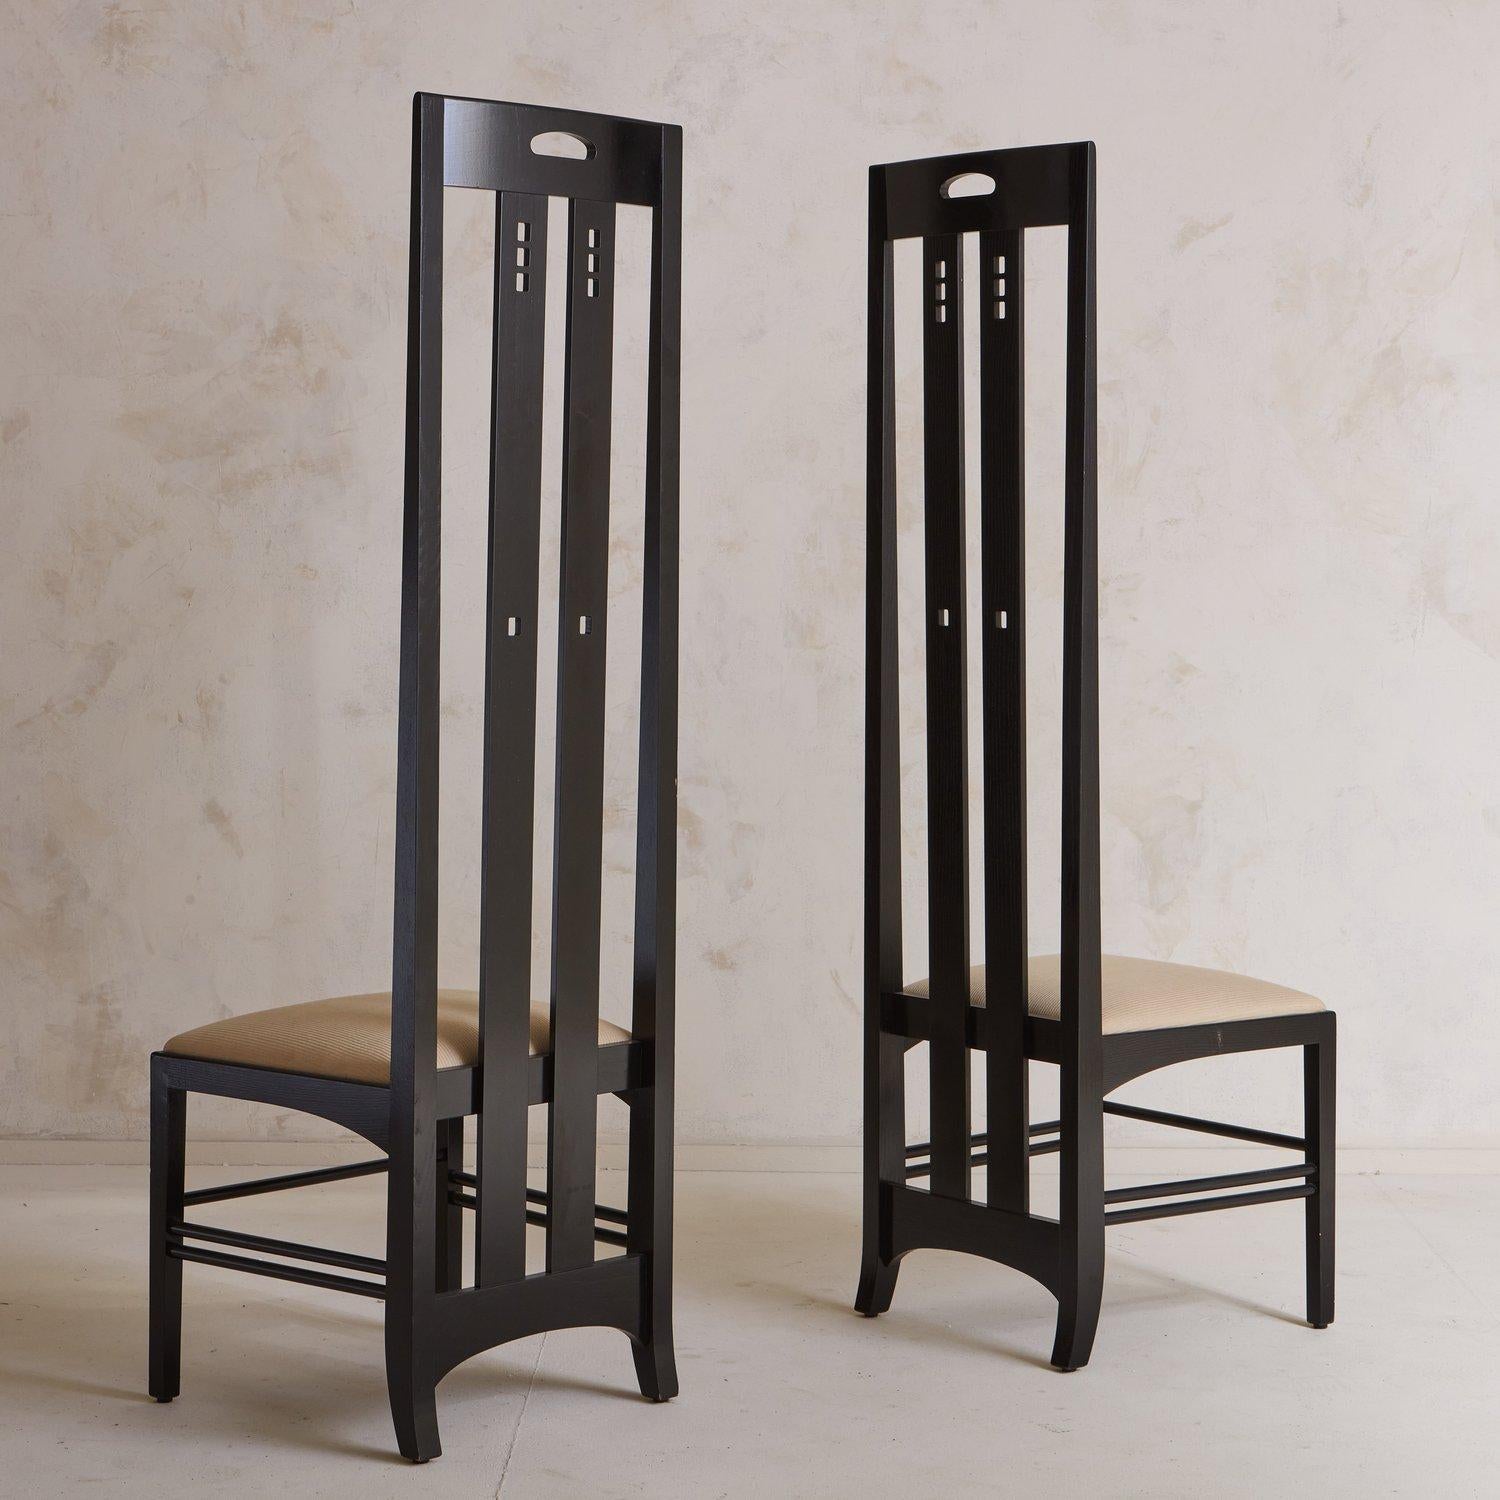 Italian Pair of Ingram Dining Chairs Attributed to Charles Mackintosh for Cassina, Italy